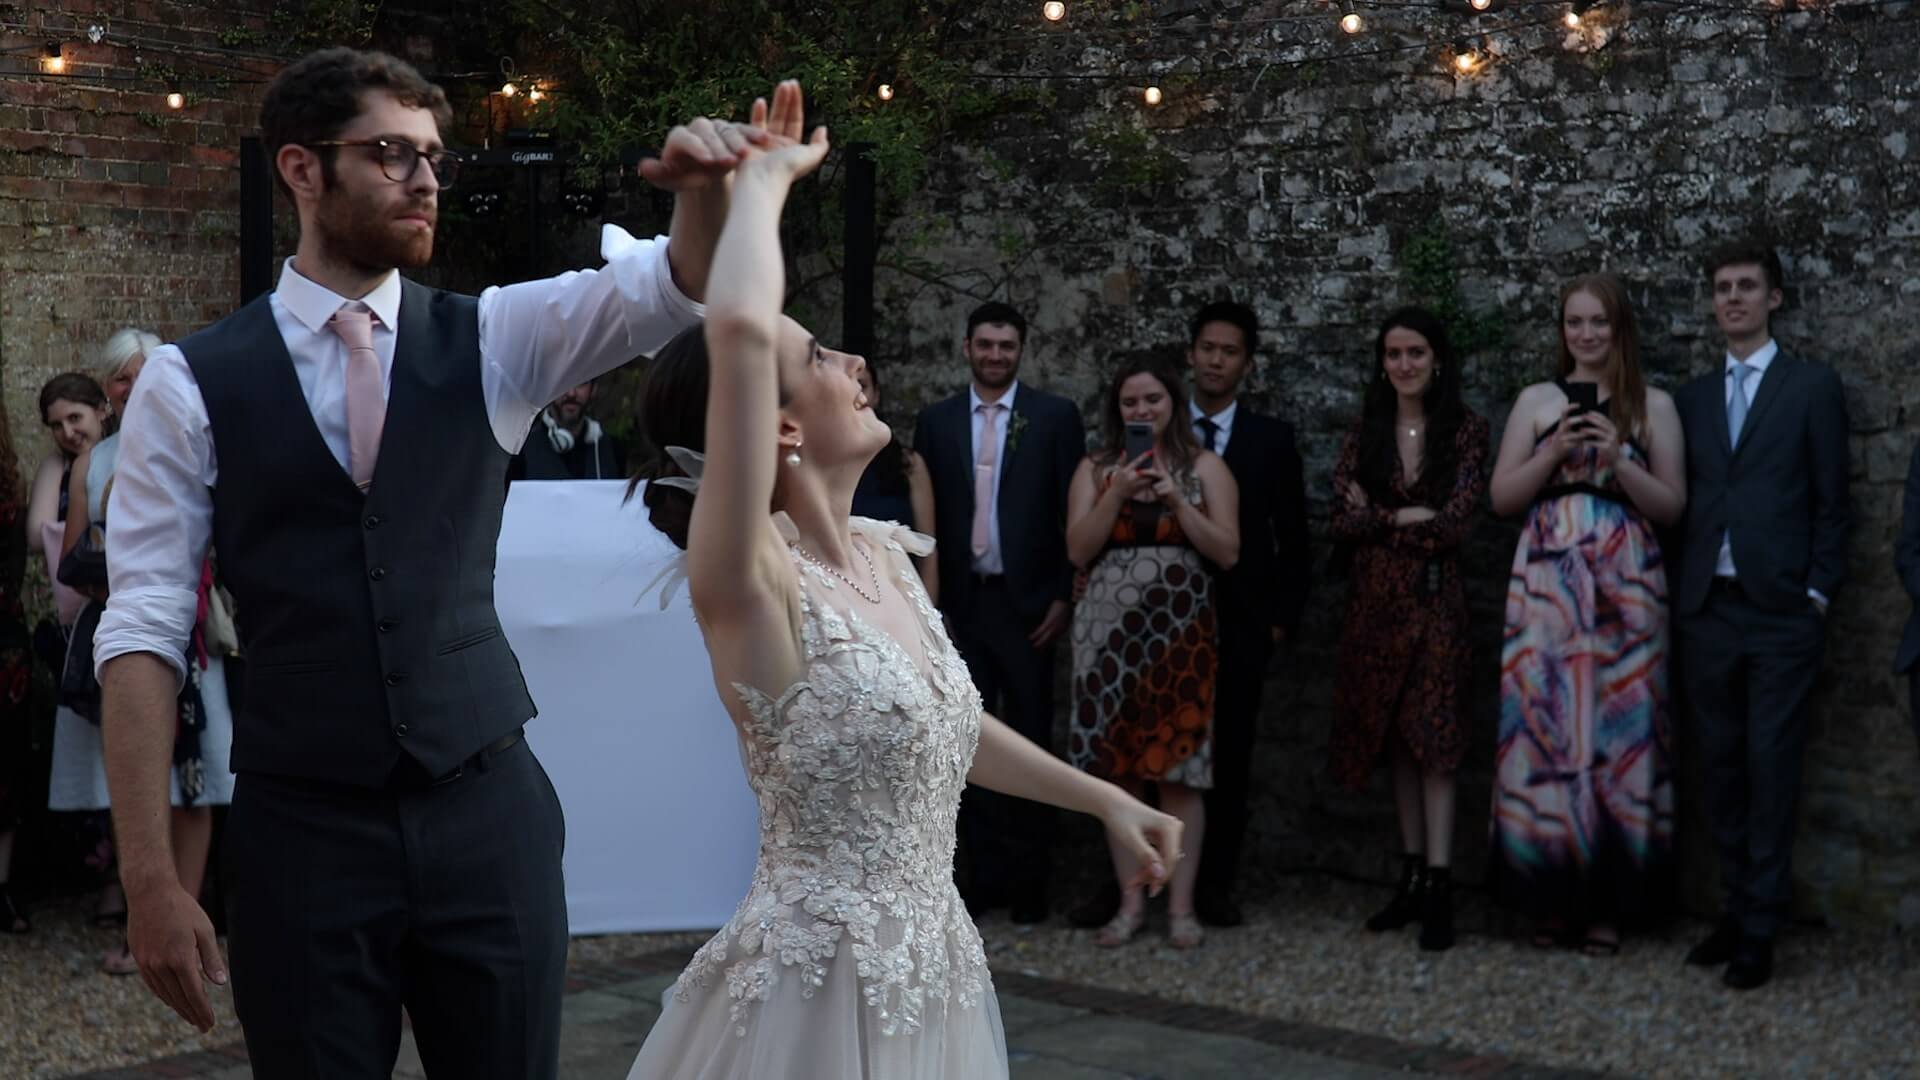 Callum twirls Toni during the first dance whilst guests joyfully watch and film on their films